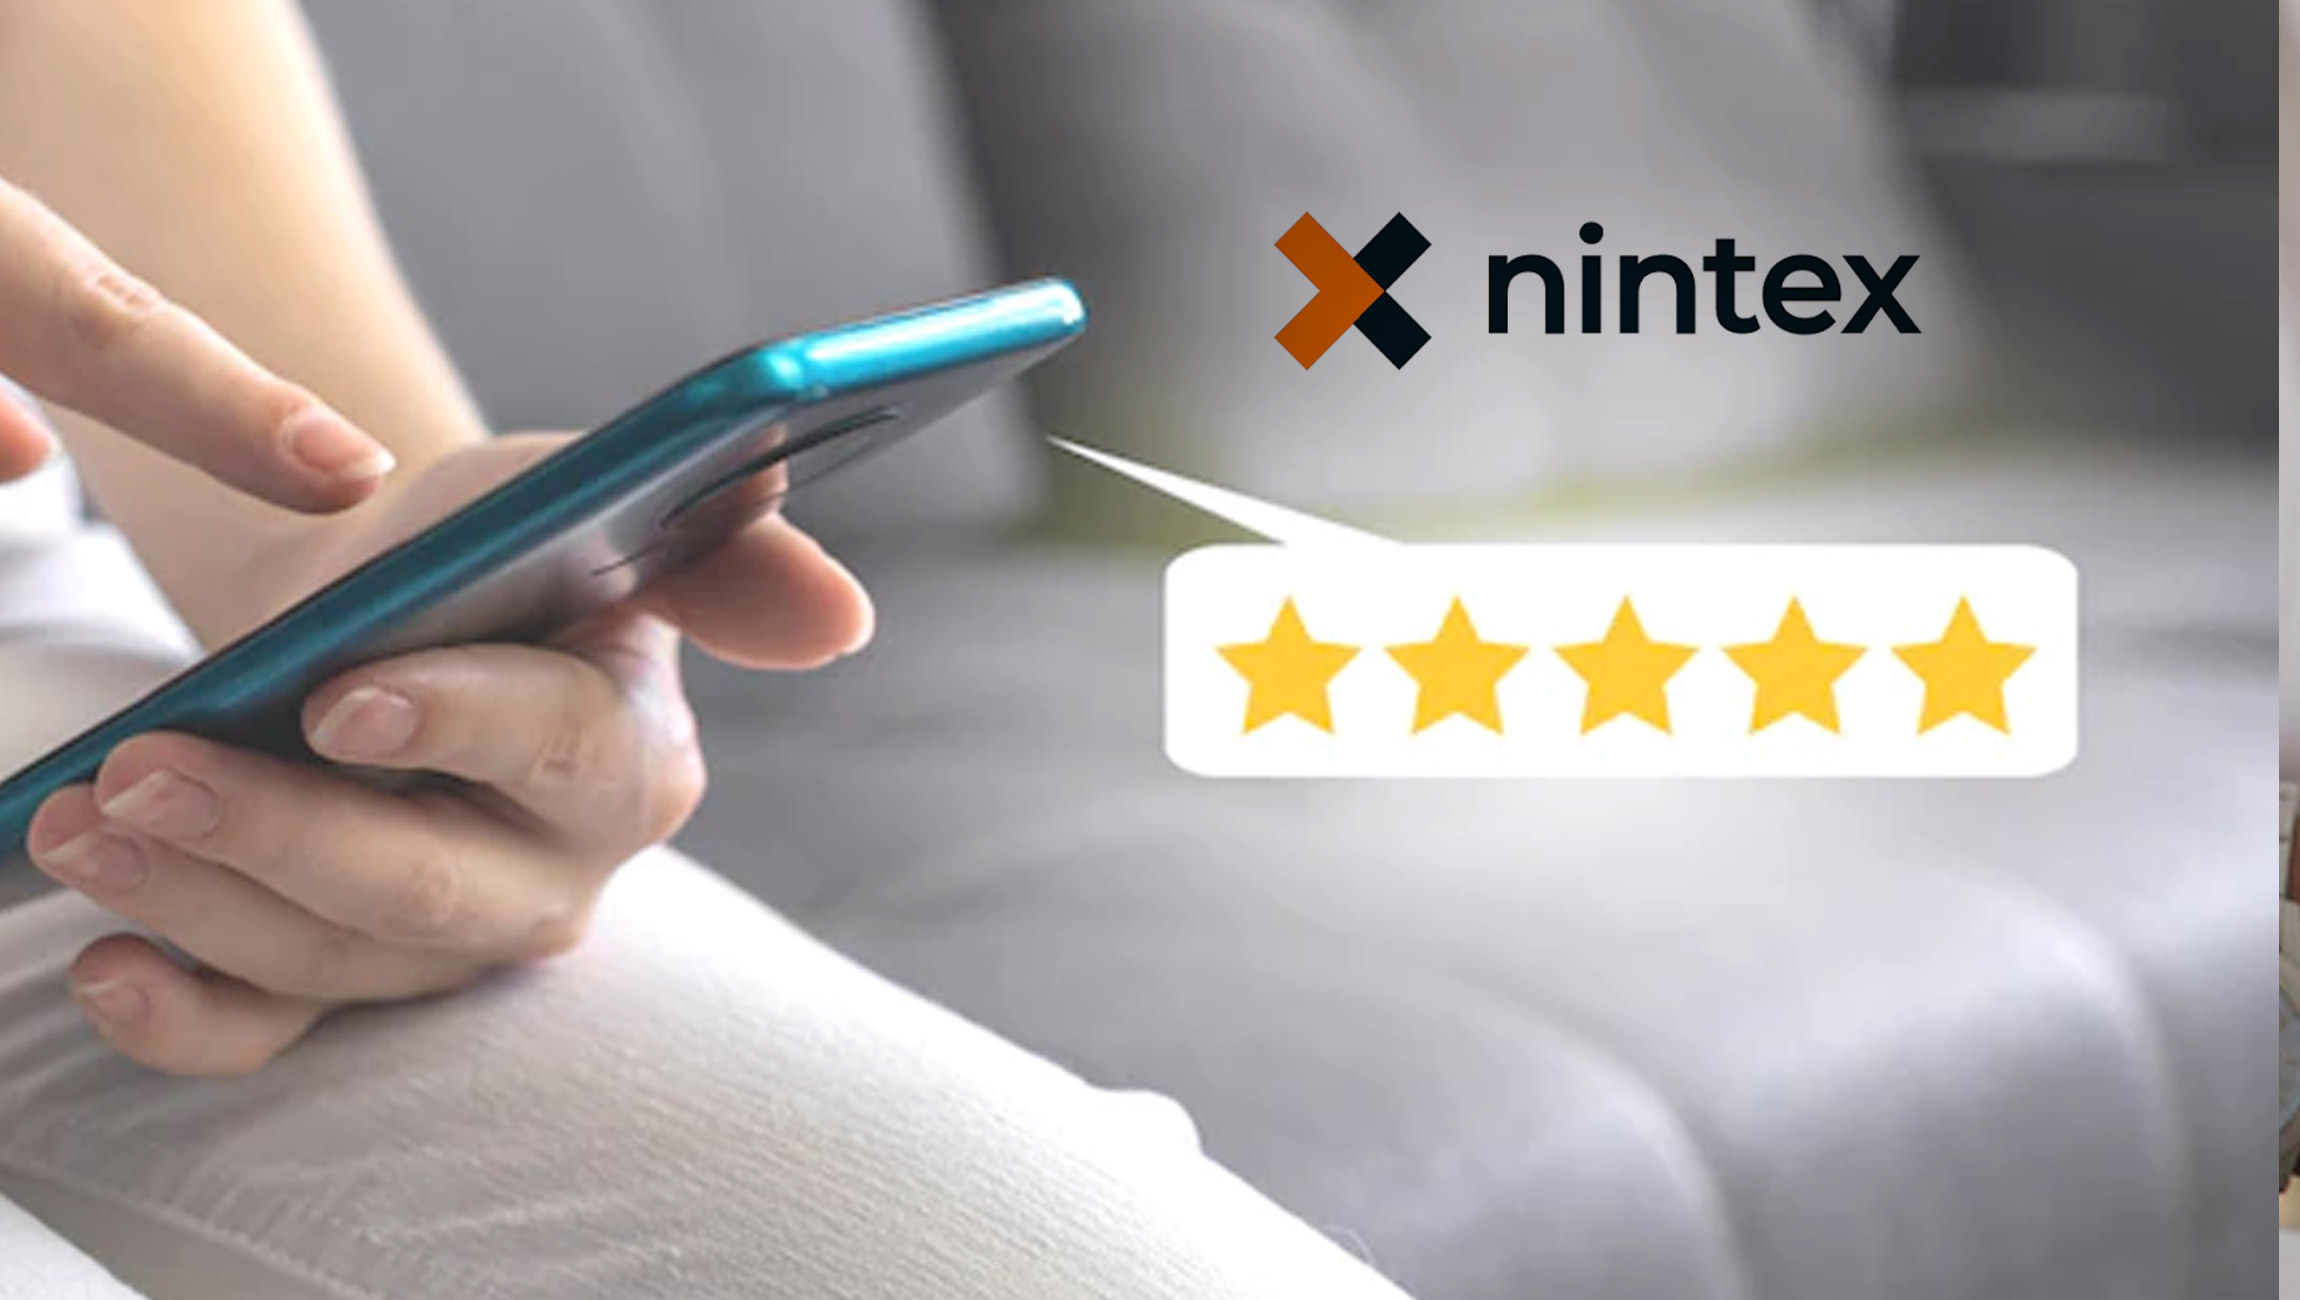 Nintex-Partner-Program-Earns-5-Star-Rating-from-CRN-for-Fourth-Consecutive-Year